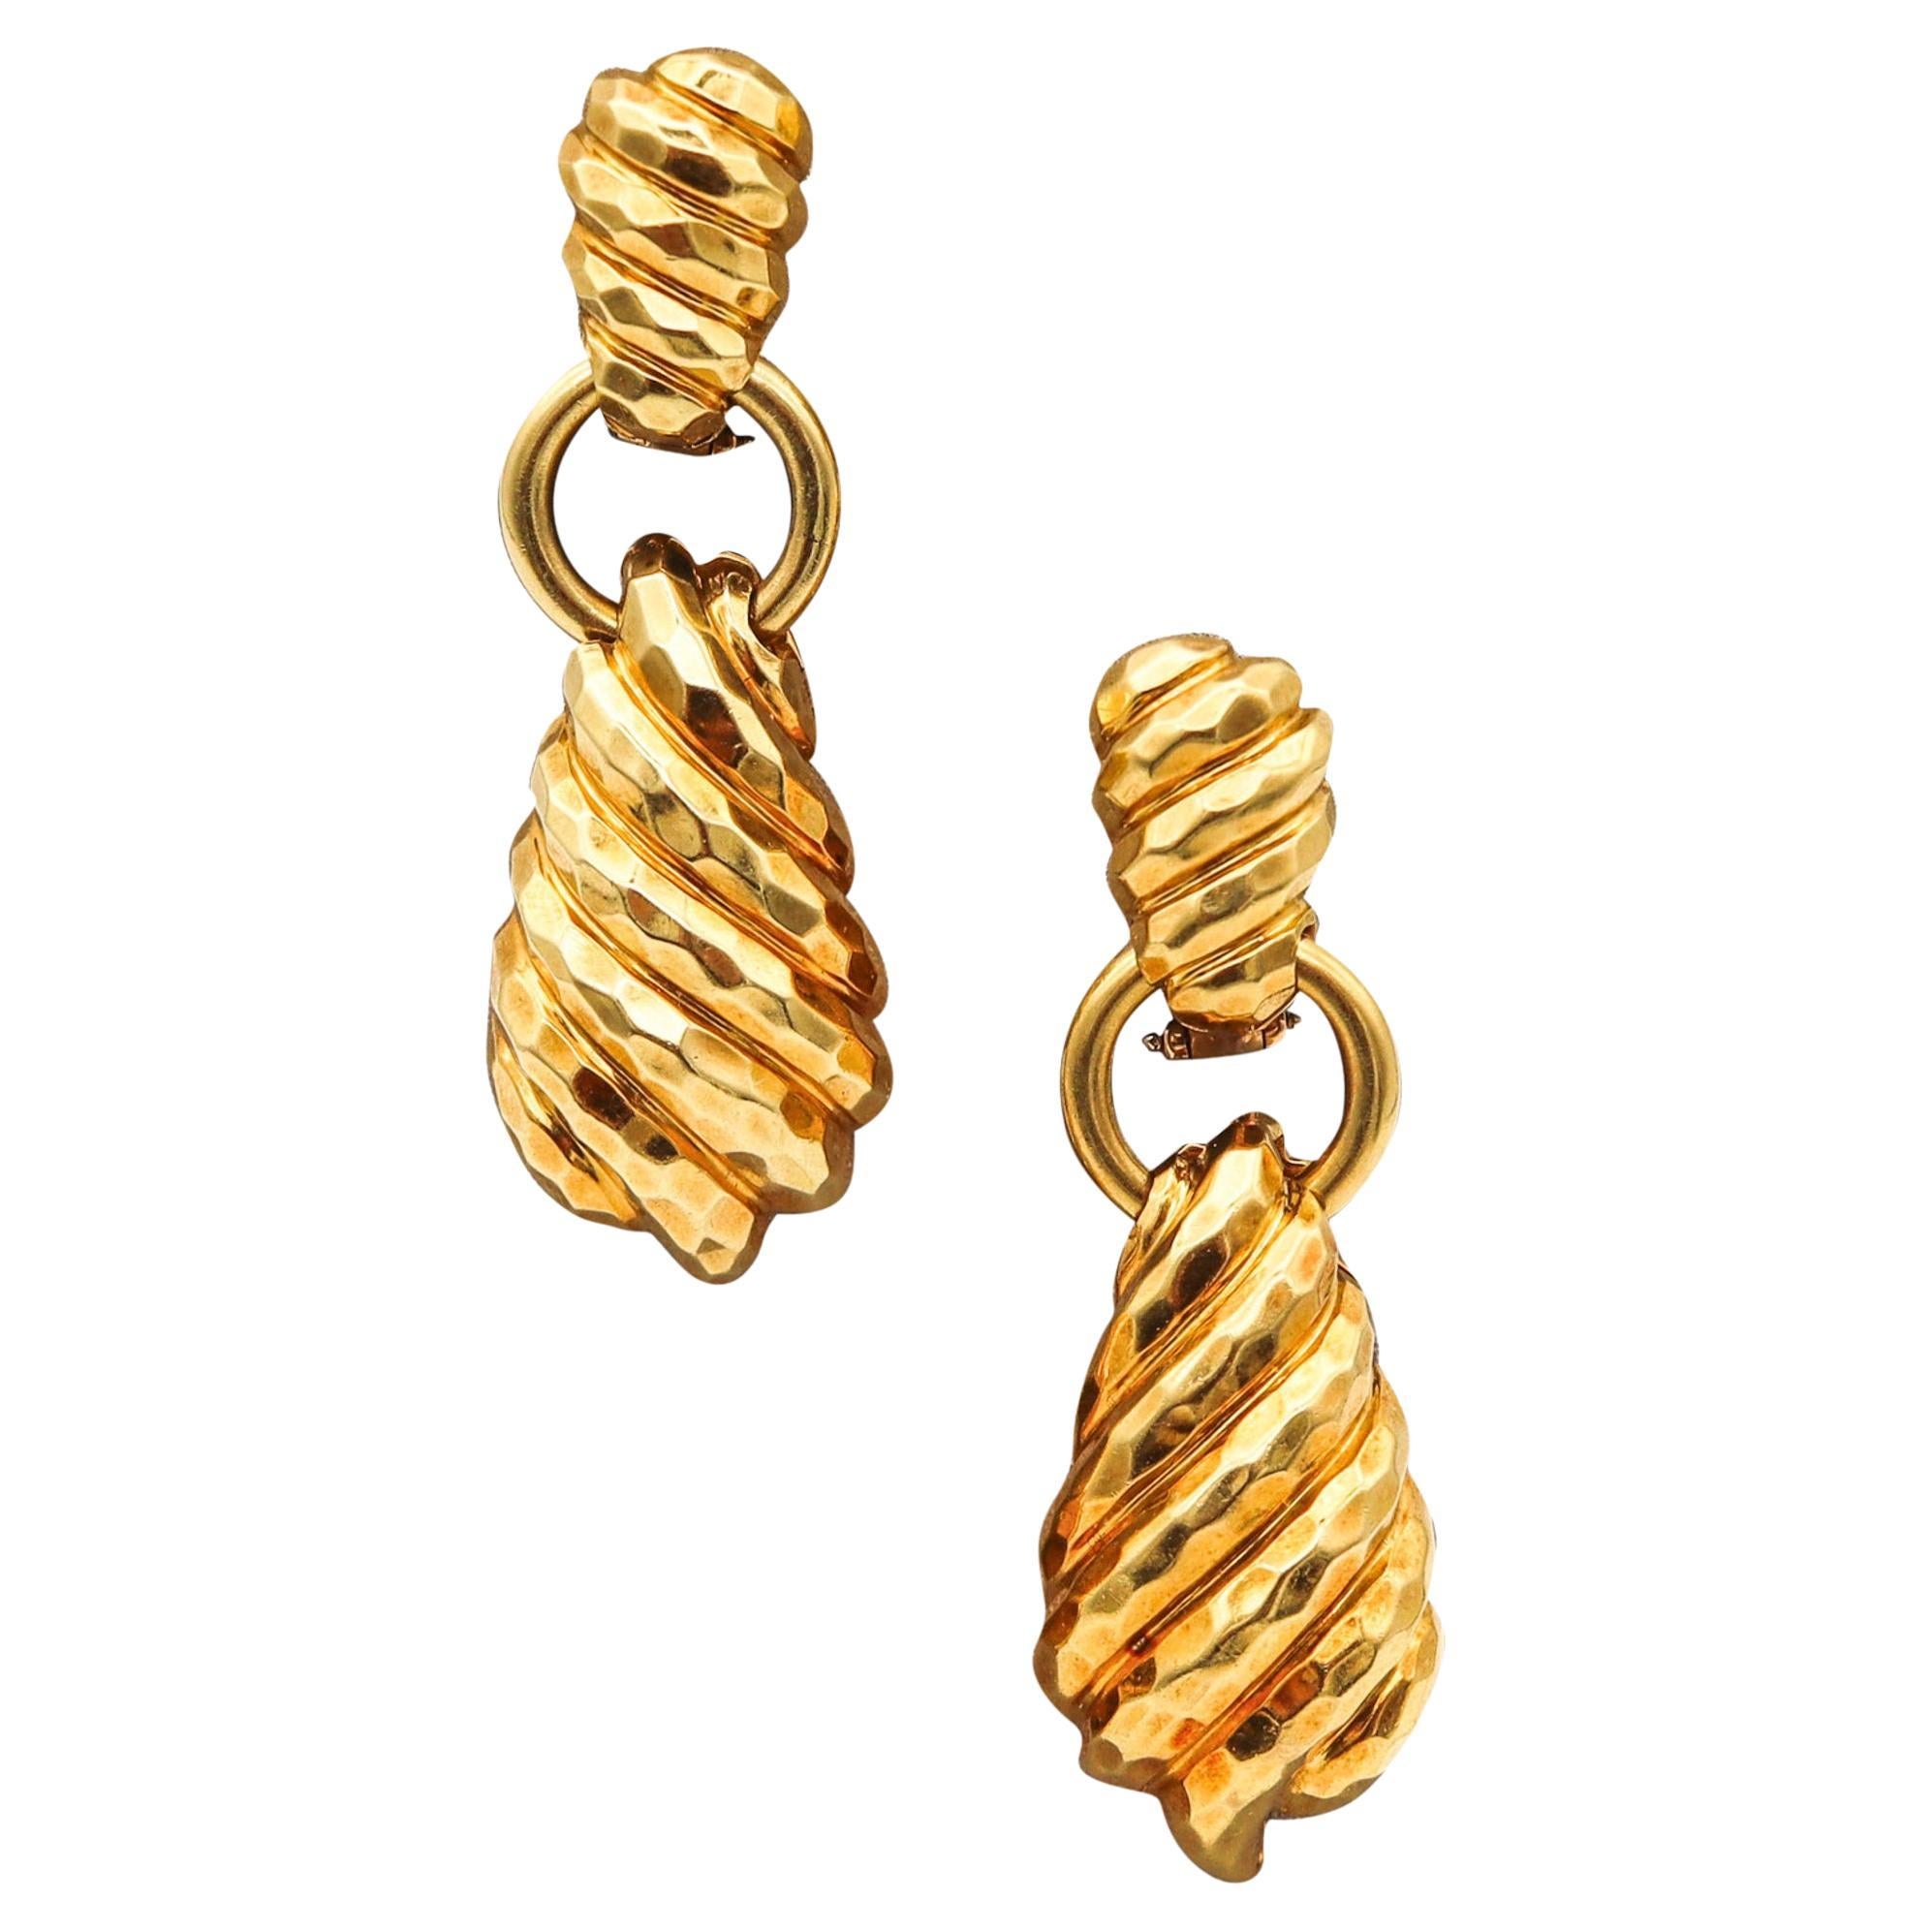 Henry Dunay New York Large Dangle Drop Earrings in Faceted Solid 18Kt Gold For Sale